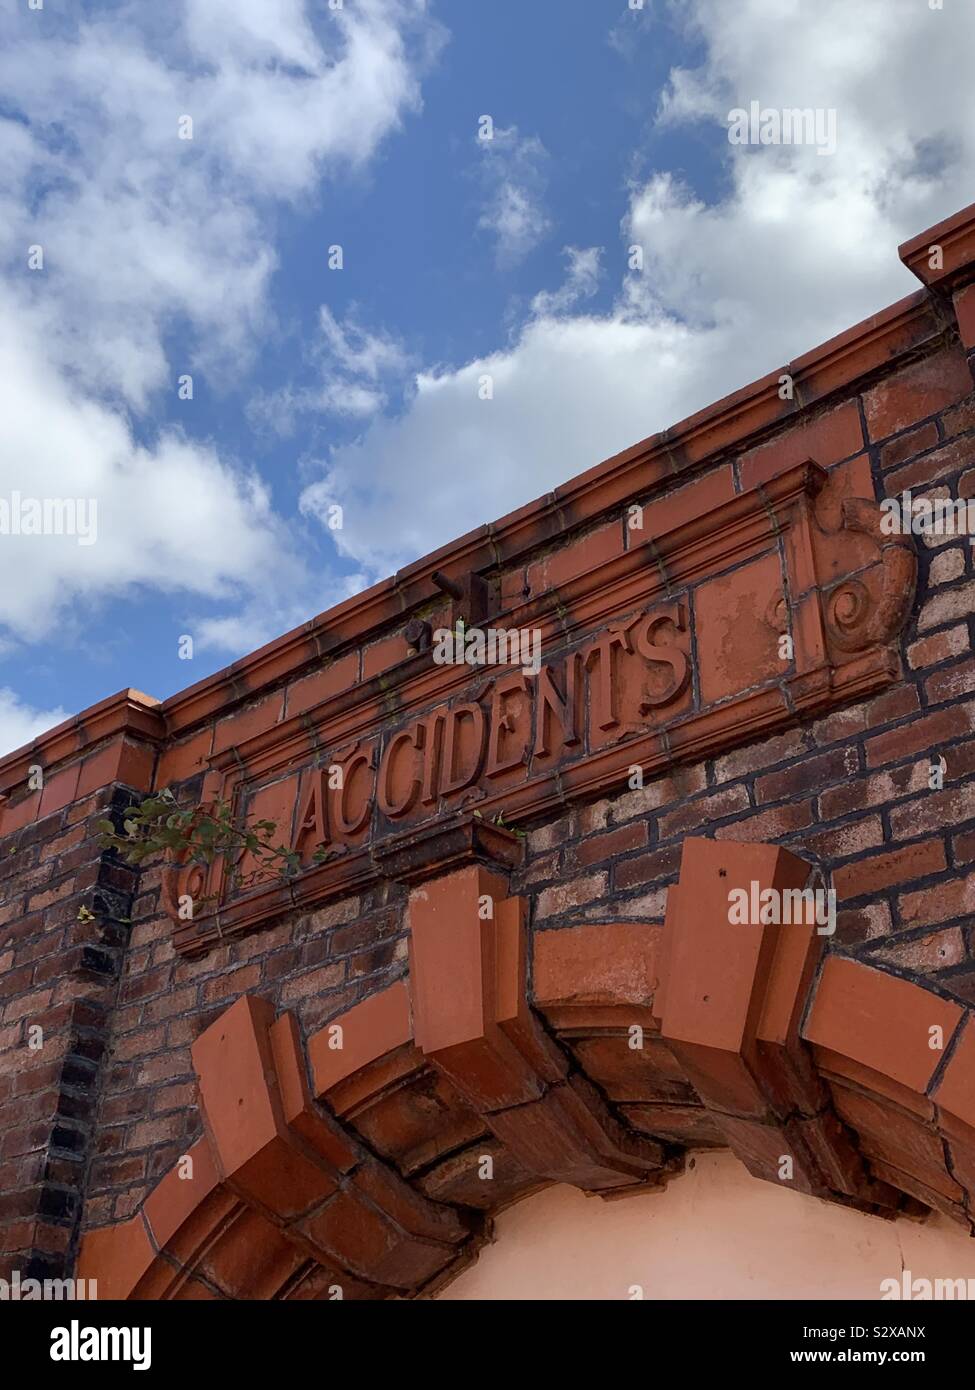 Victorian entrance archway saying accidents with old weed filled brickwork against a blue cloud sky Stock Photo